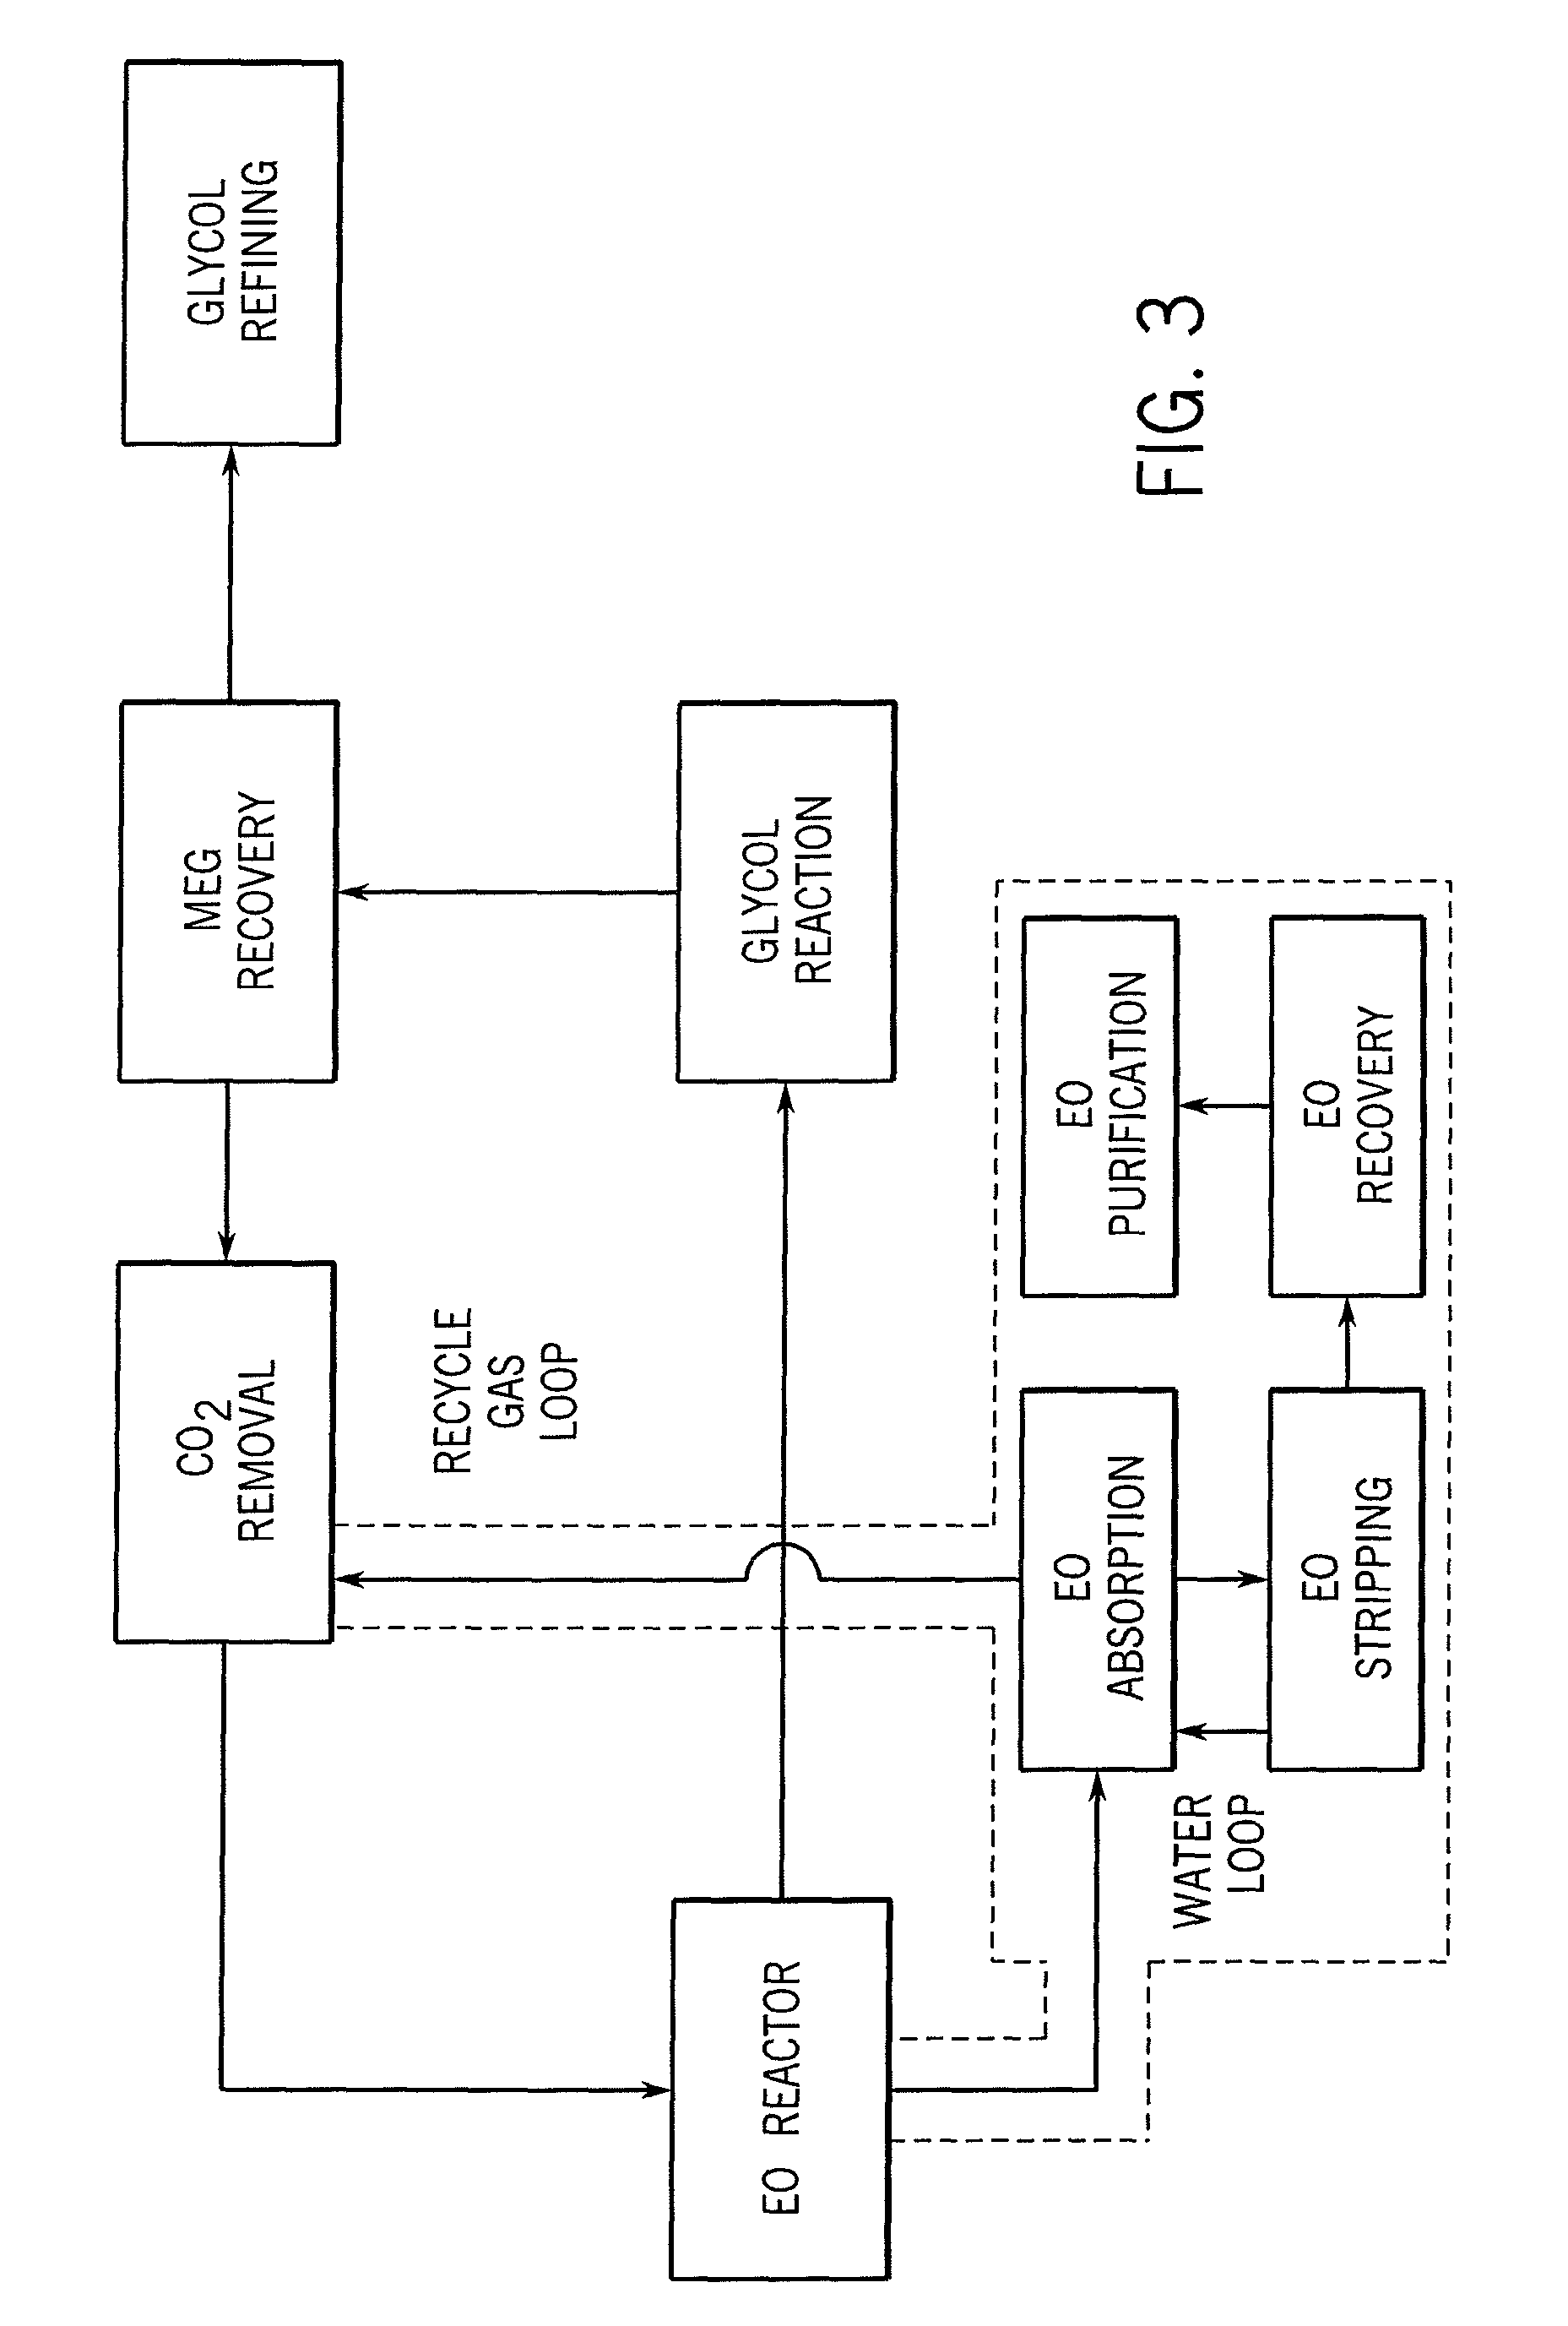 Two-stage, gas phase process for the manufacture of alkylene glycol